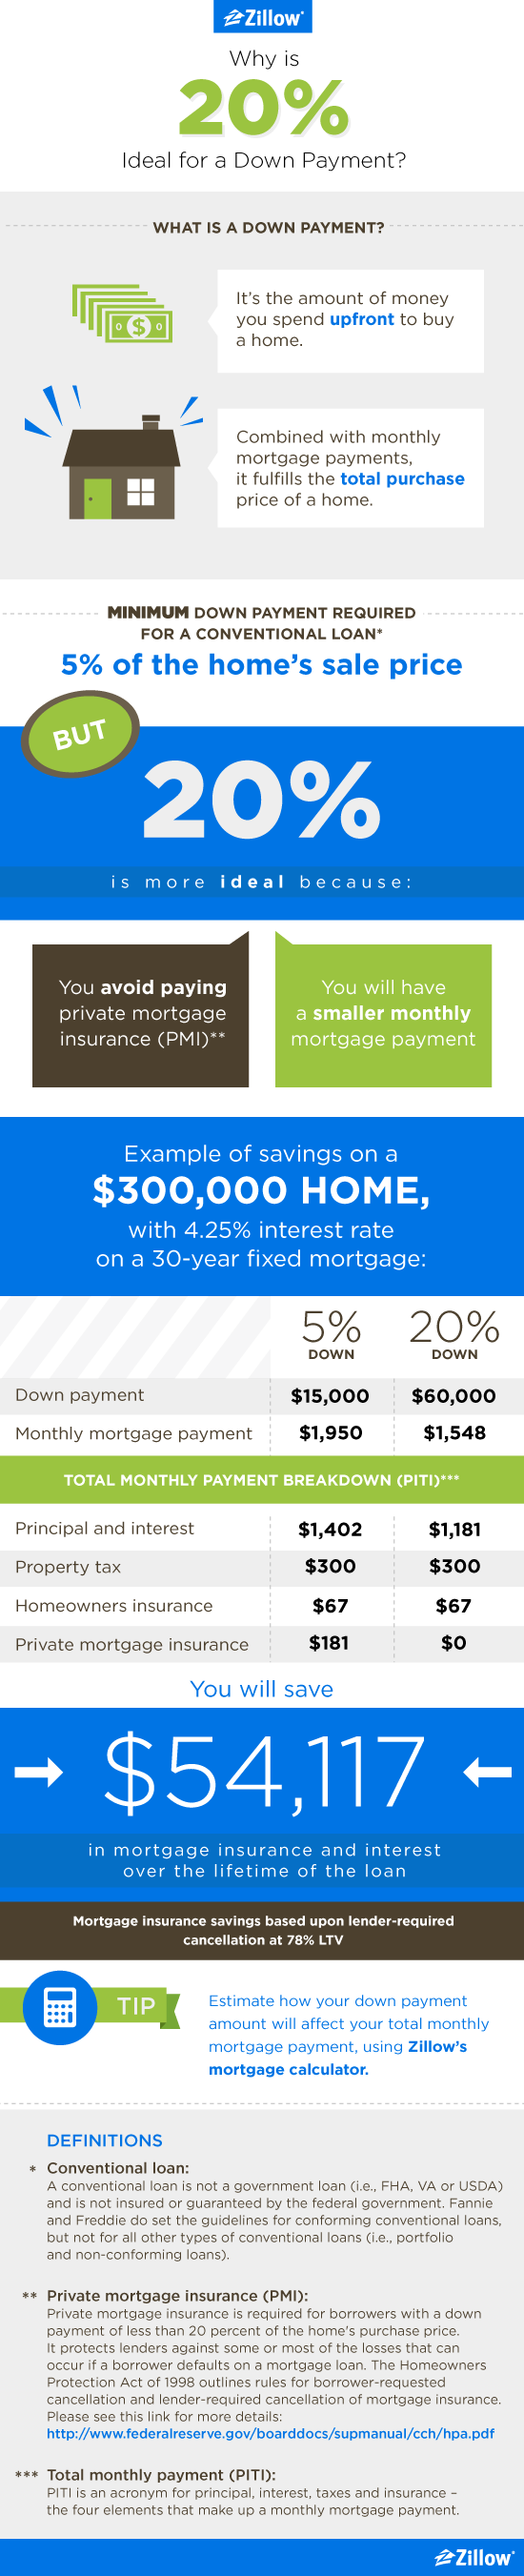 how much should you have for a down payment